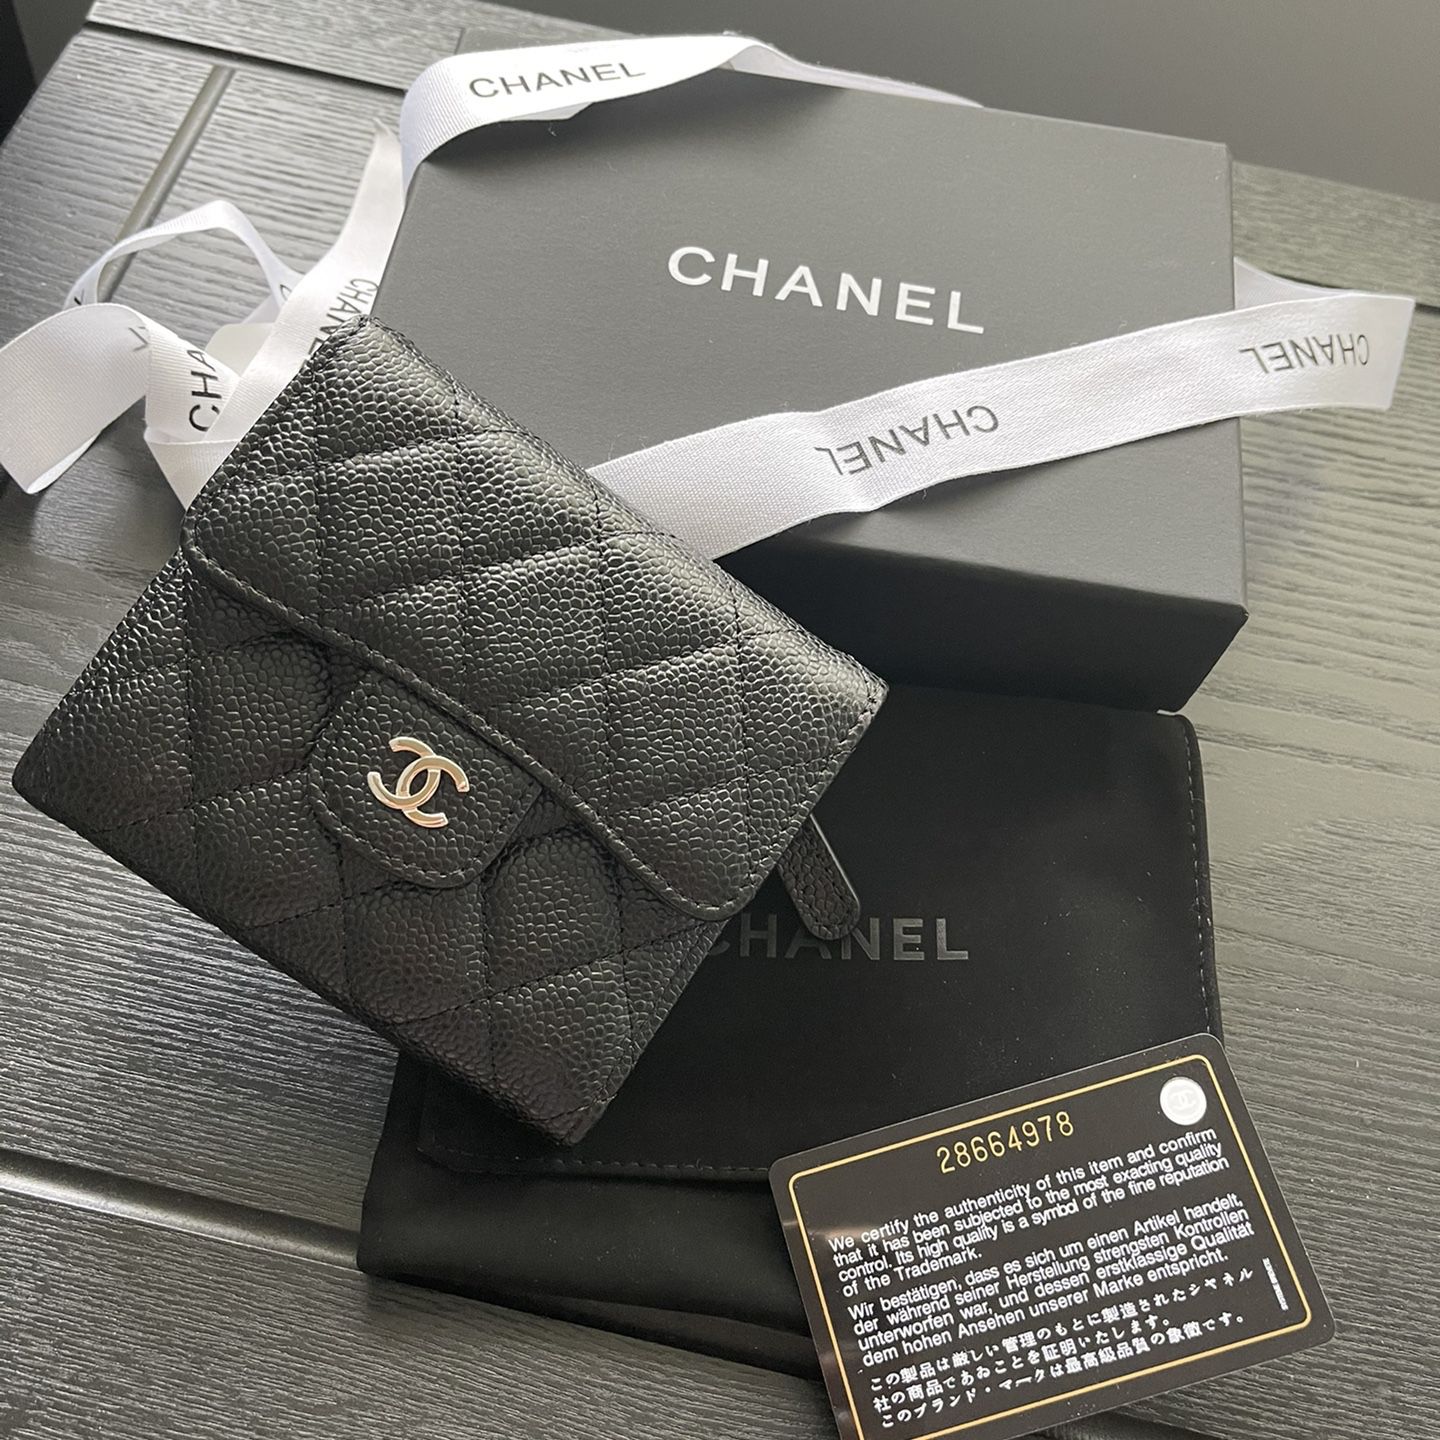 Chanel Caviar Wallet for Sale in Columbia, MD - OfferUp